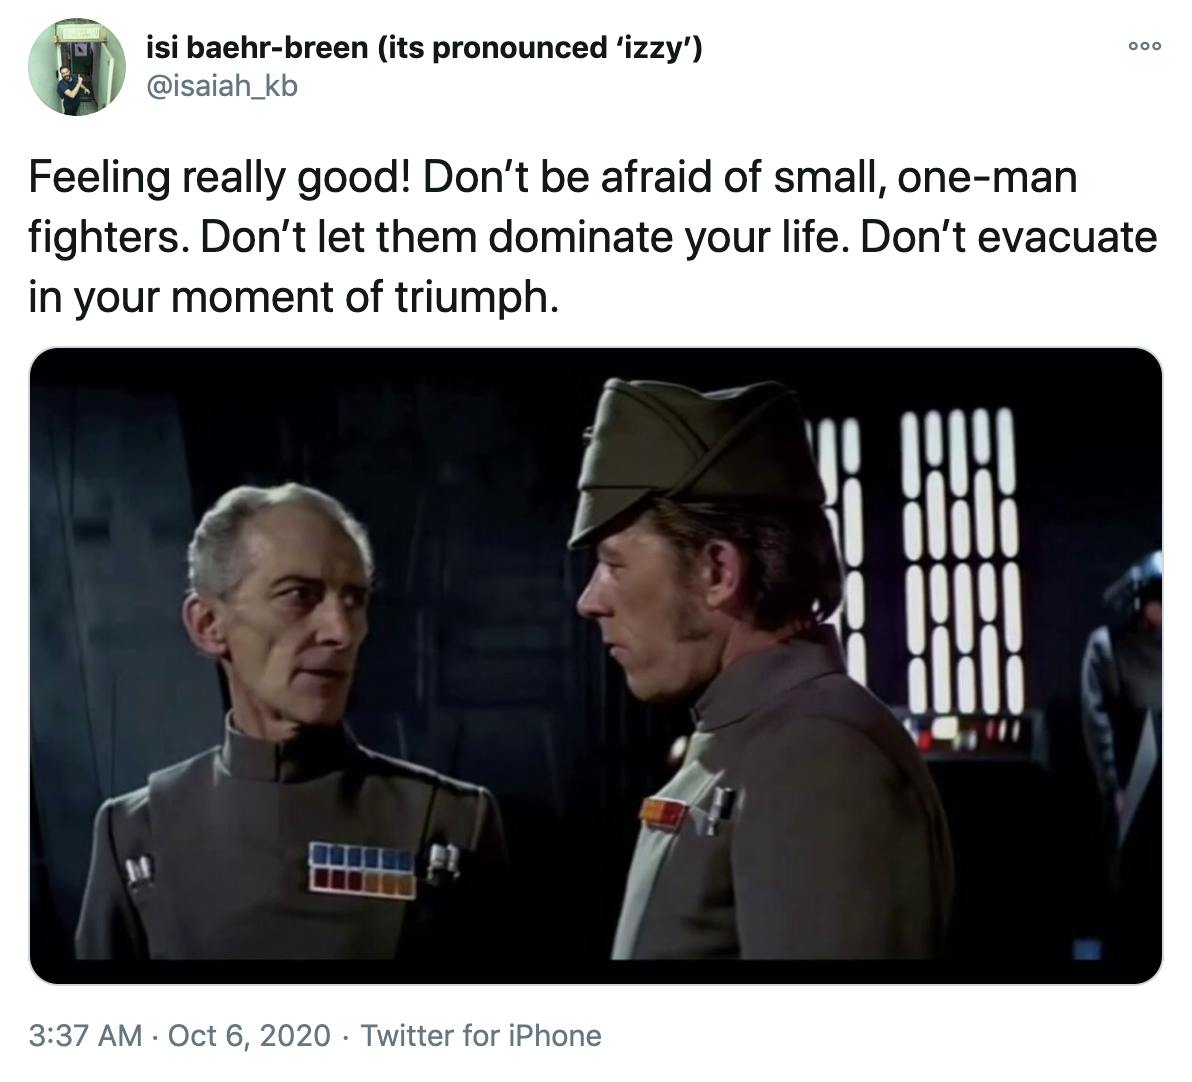 "Feeling really good! Don’t be afraid of small, one-man fighters. Don’t let them dominate your life. Don’t evacuate in your moment of triumph." Screencap of Grand Moff Tarkin talking to one of his staff from Star Wars: A New Hope